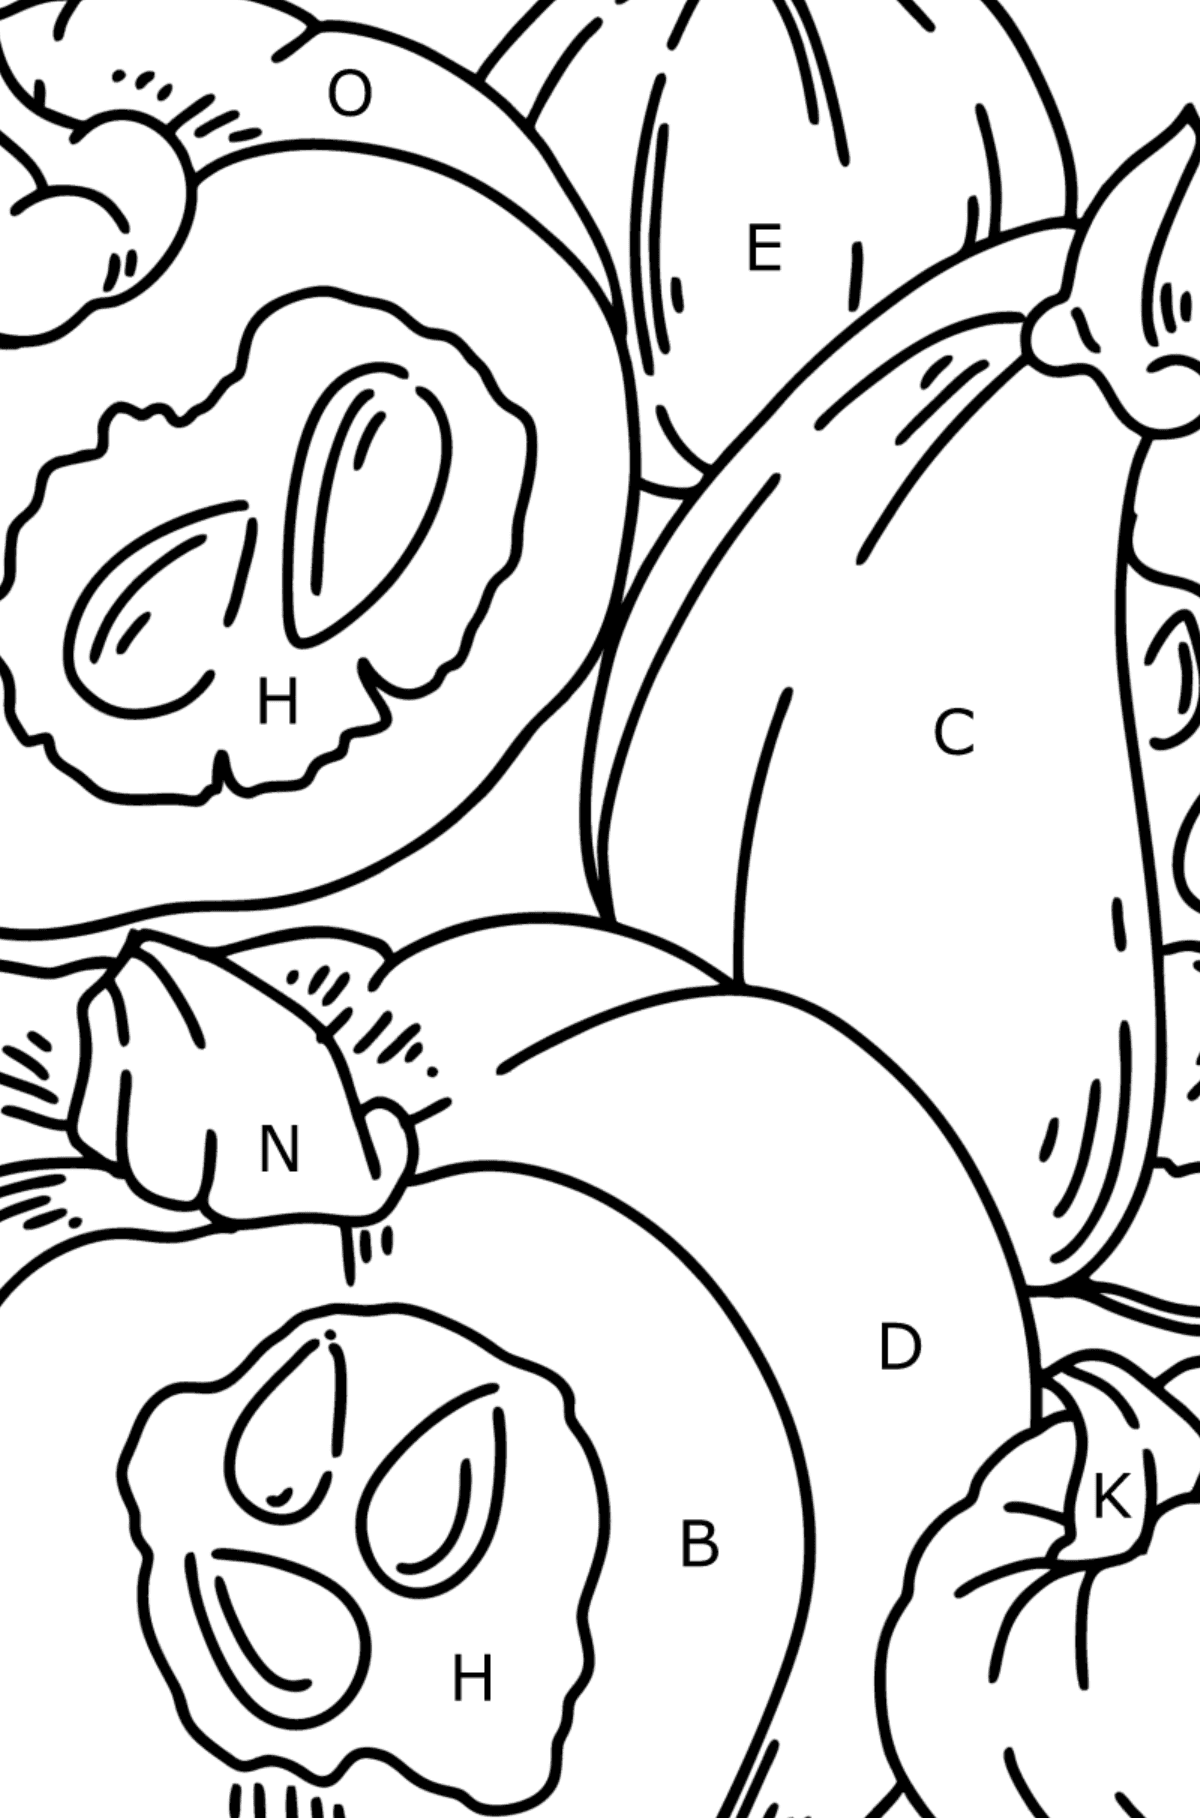 Coloring page Autumn - Pumpkin harvest - Coloring by Letters for Kids